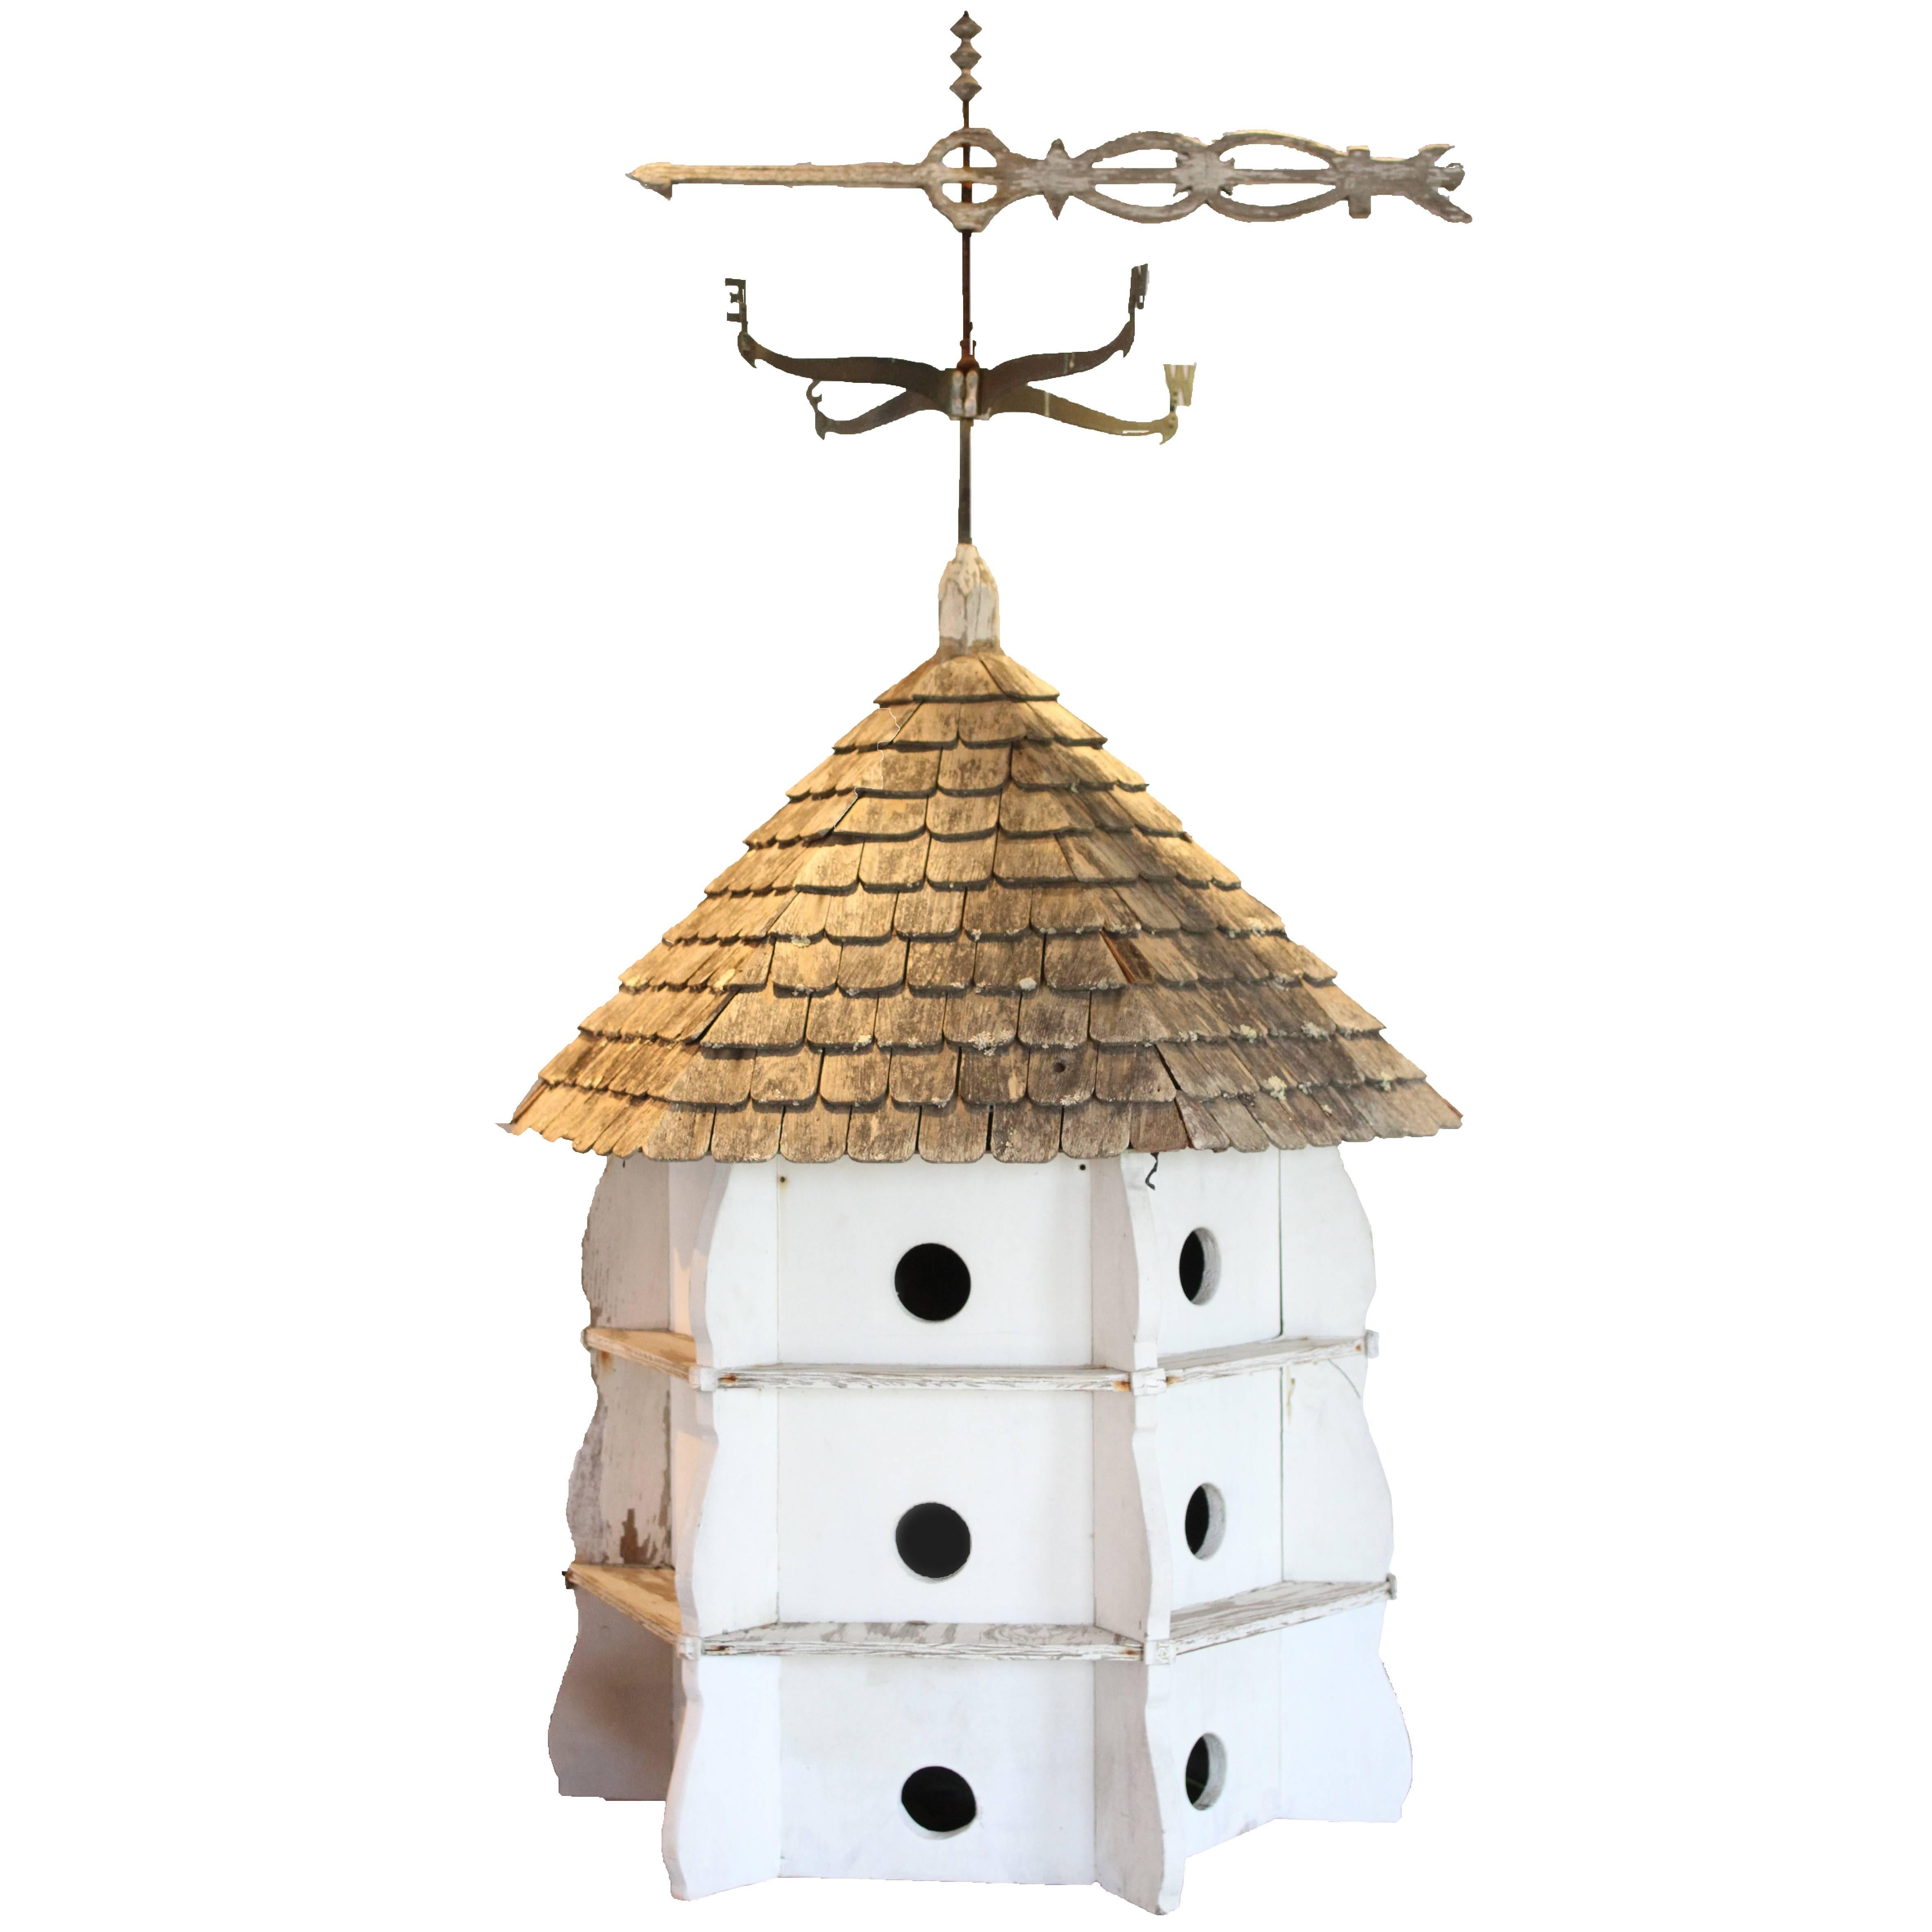 Architectural Purple Martin Birdhouse with Wood Shingled Roof and Weathervane For Sale